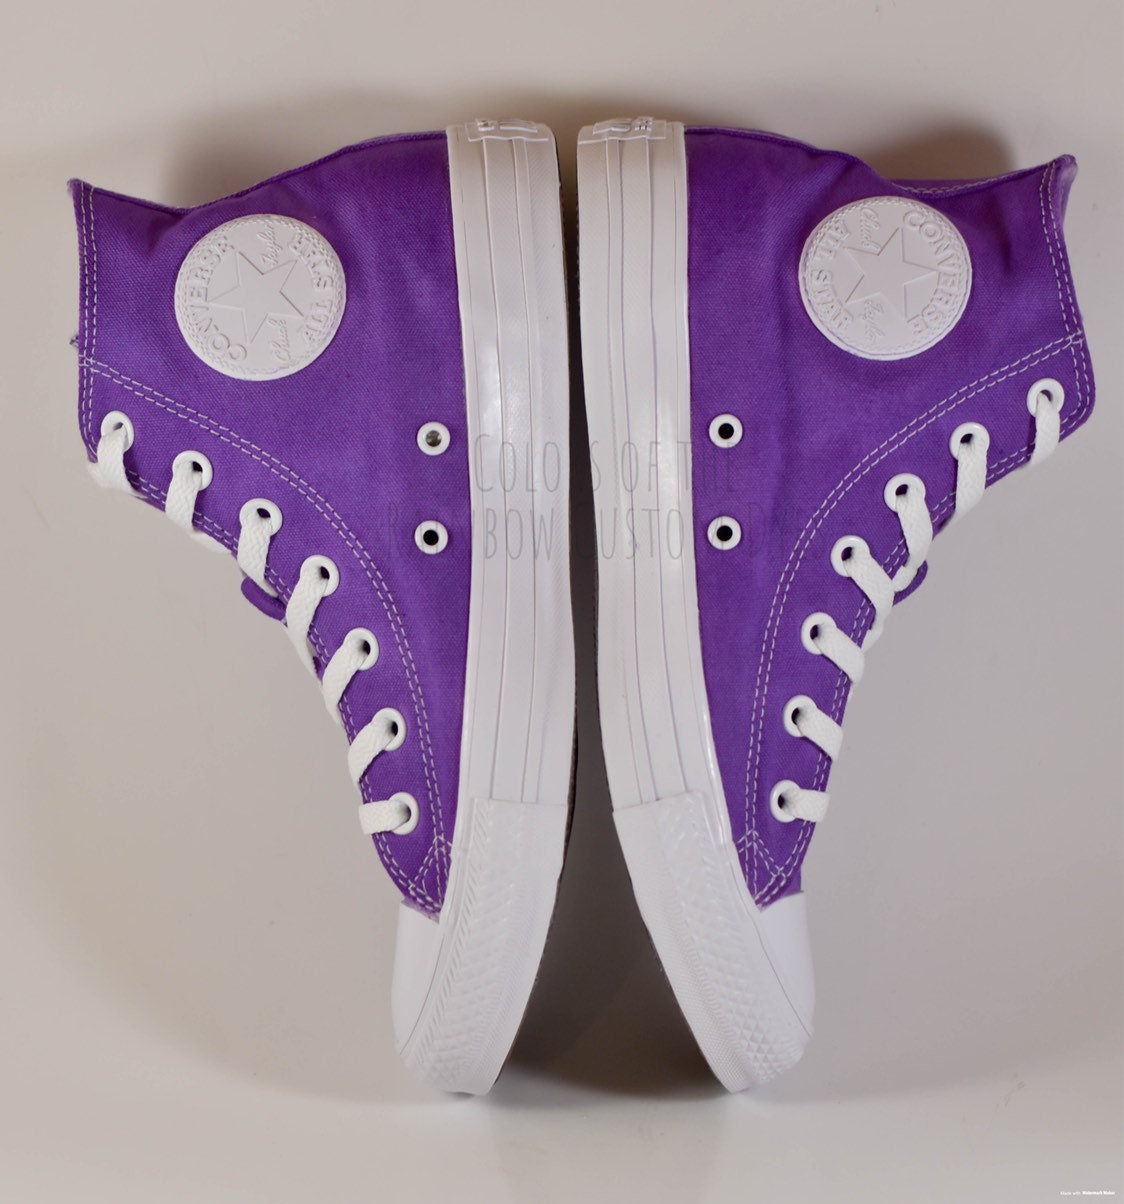 Custom Dyed Solid Converse All Star Monochrome High Top